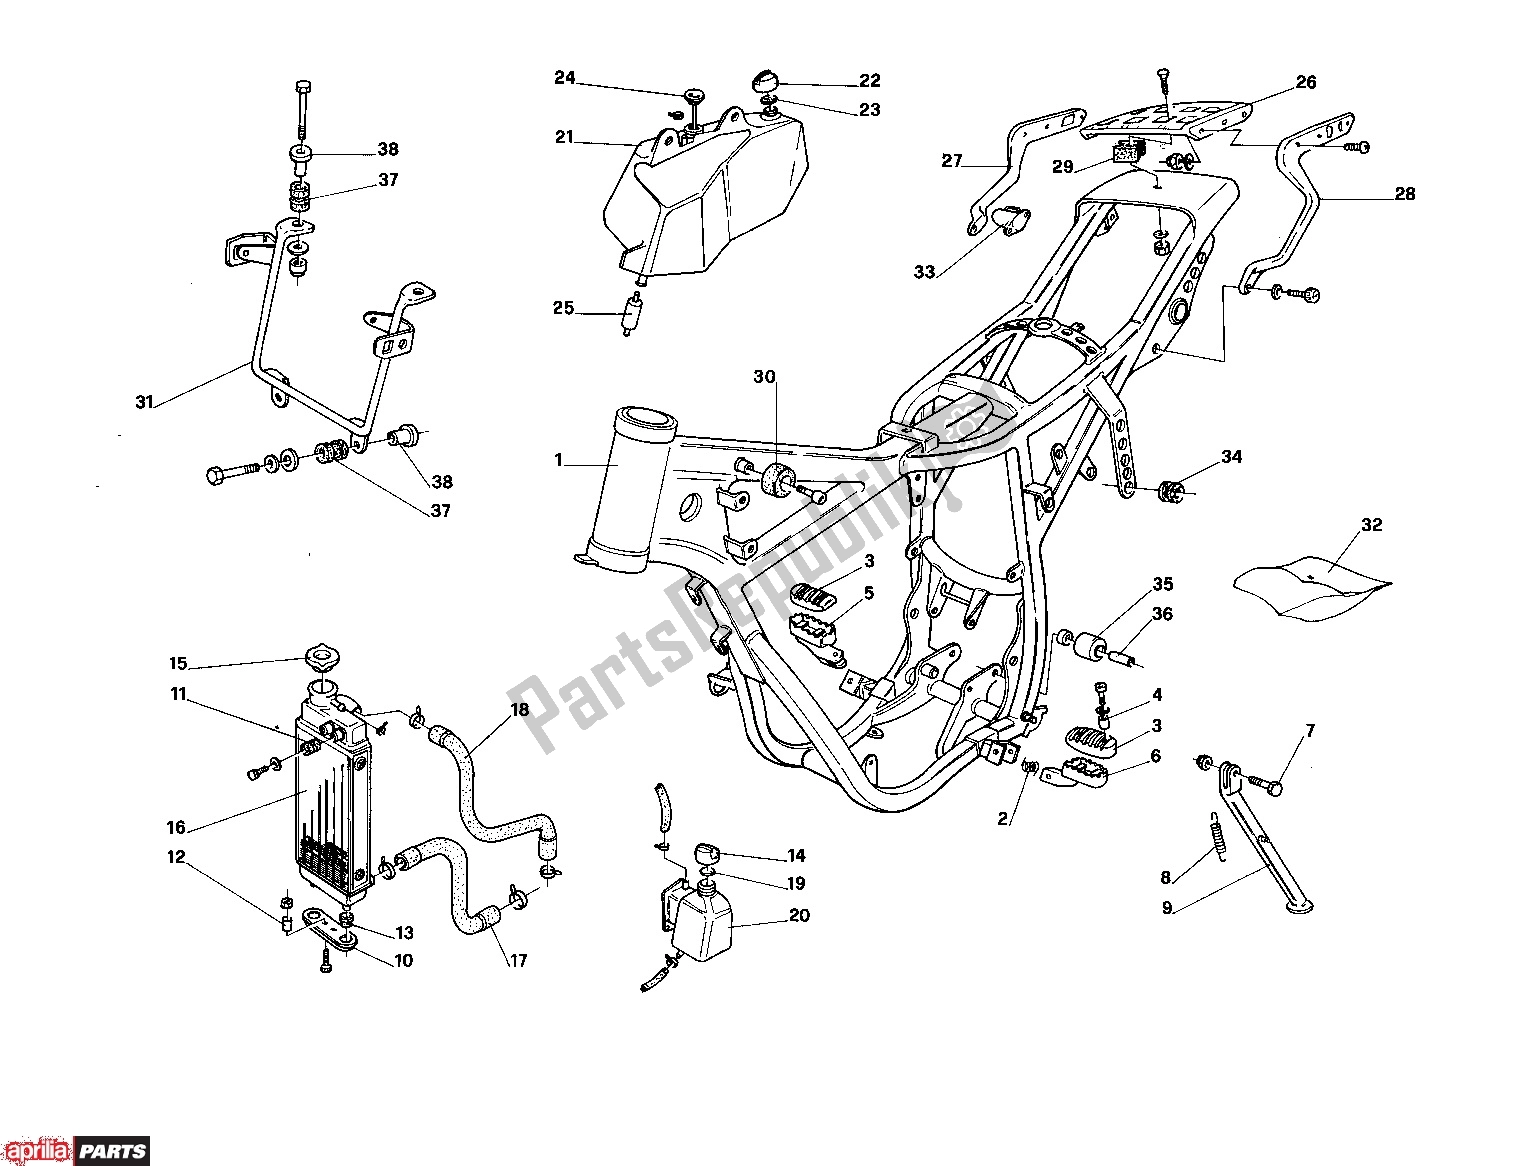 All parts for the Frame of the Aprilia RX 210 50 1989